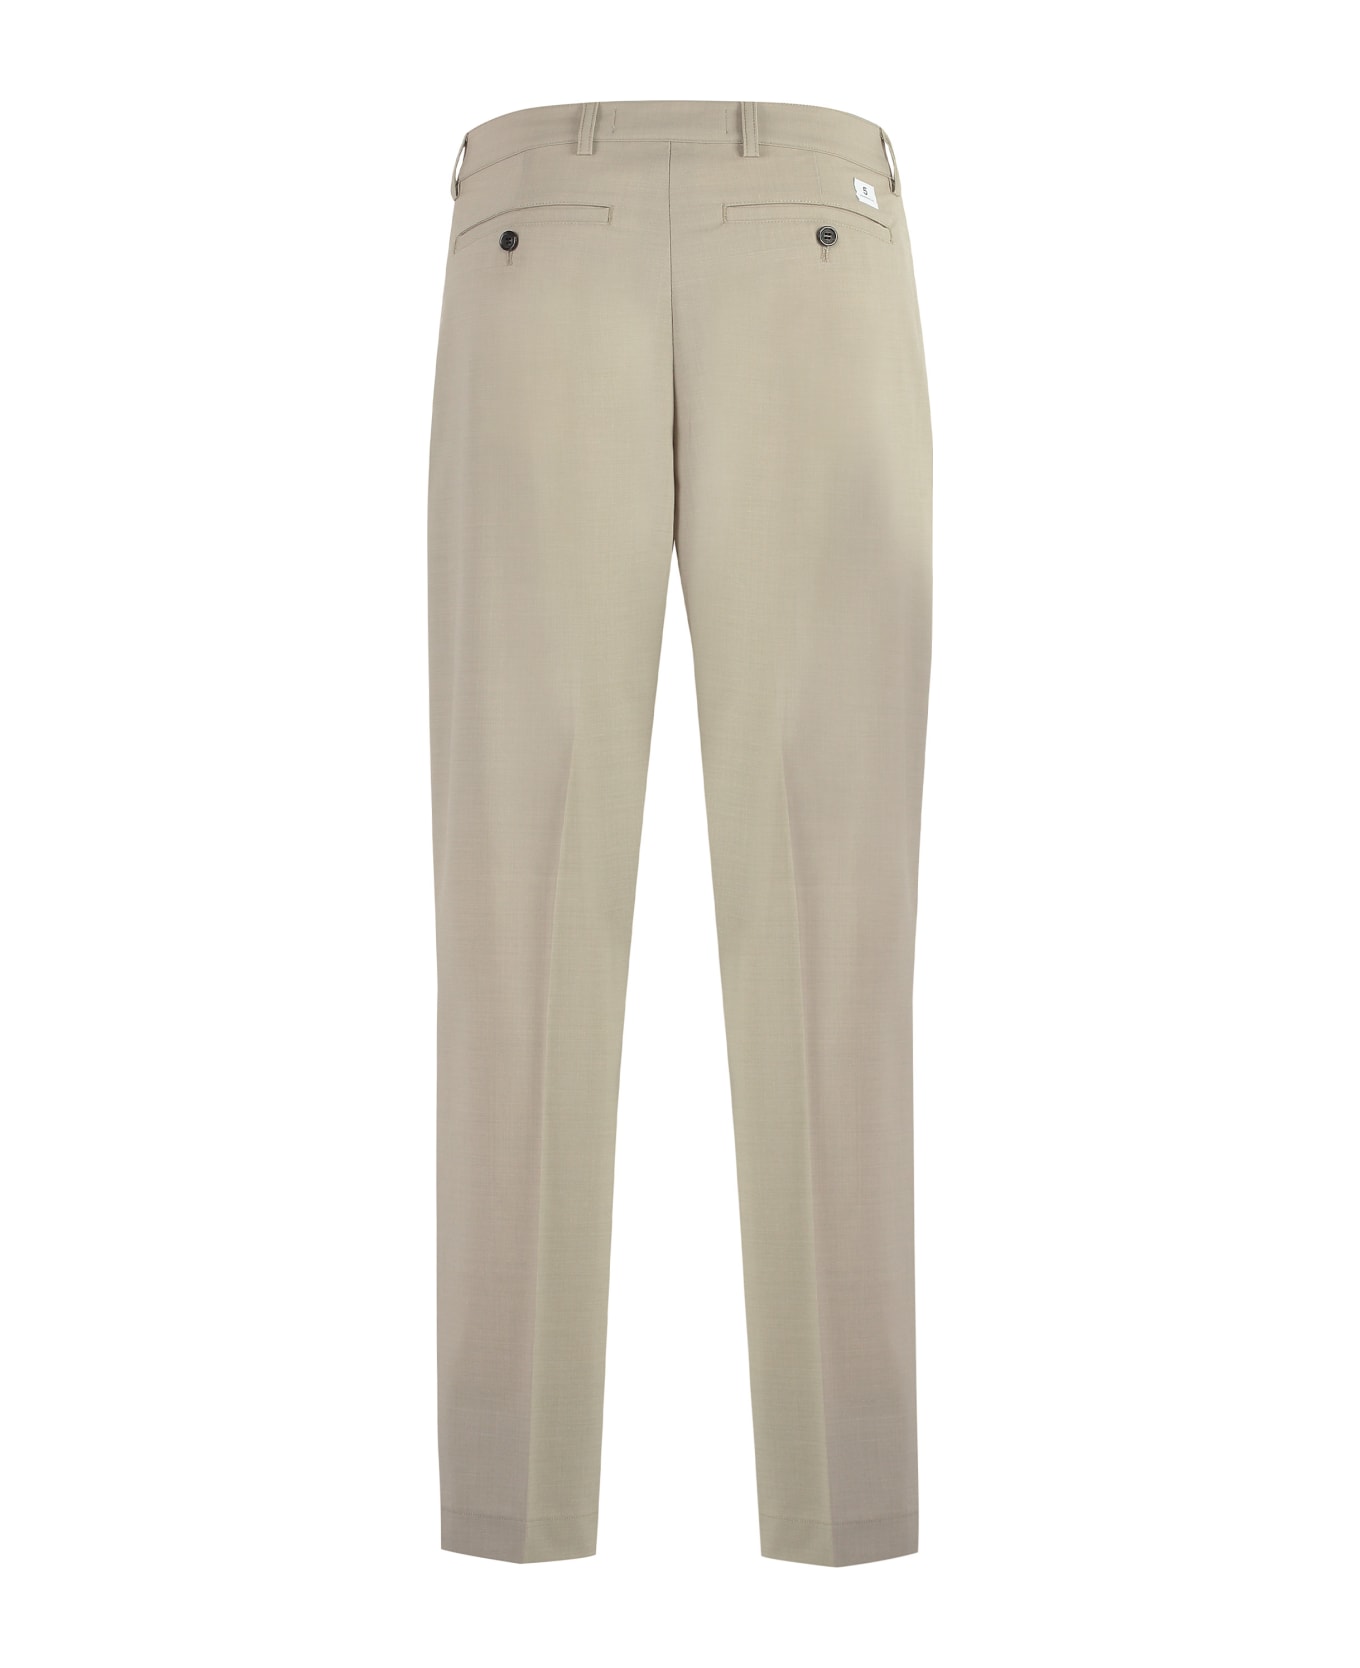 Department Five E-motion Wool Blend Trousers - Beige ボトムス